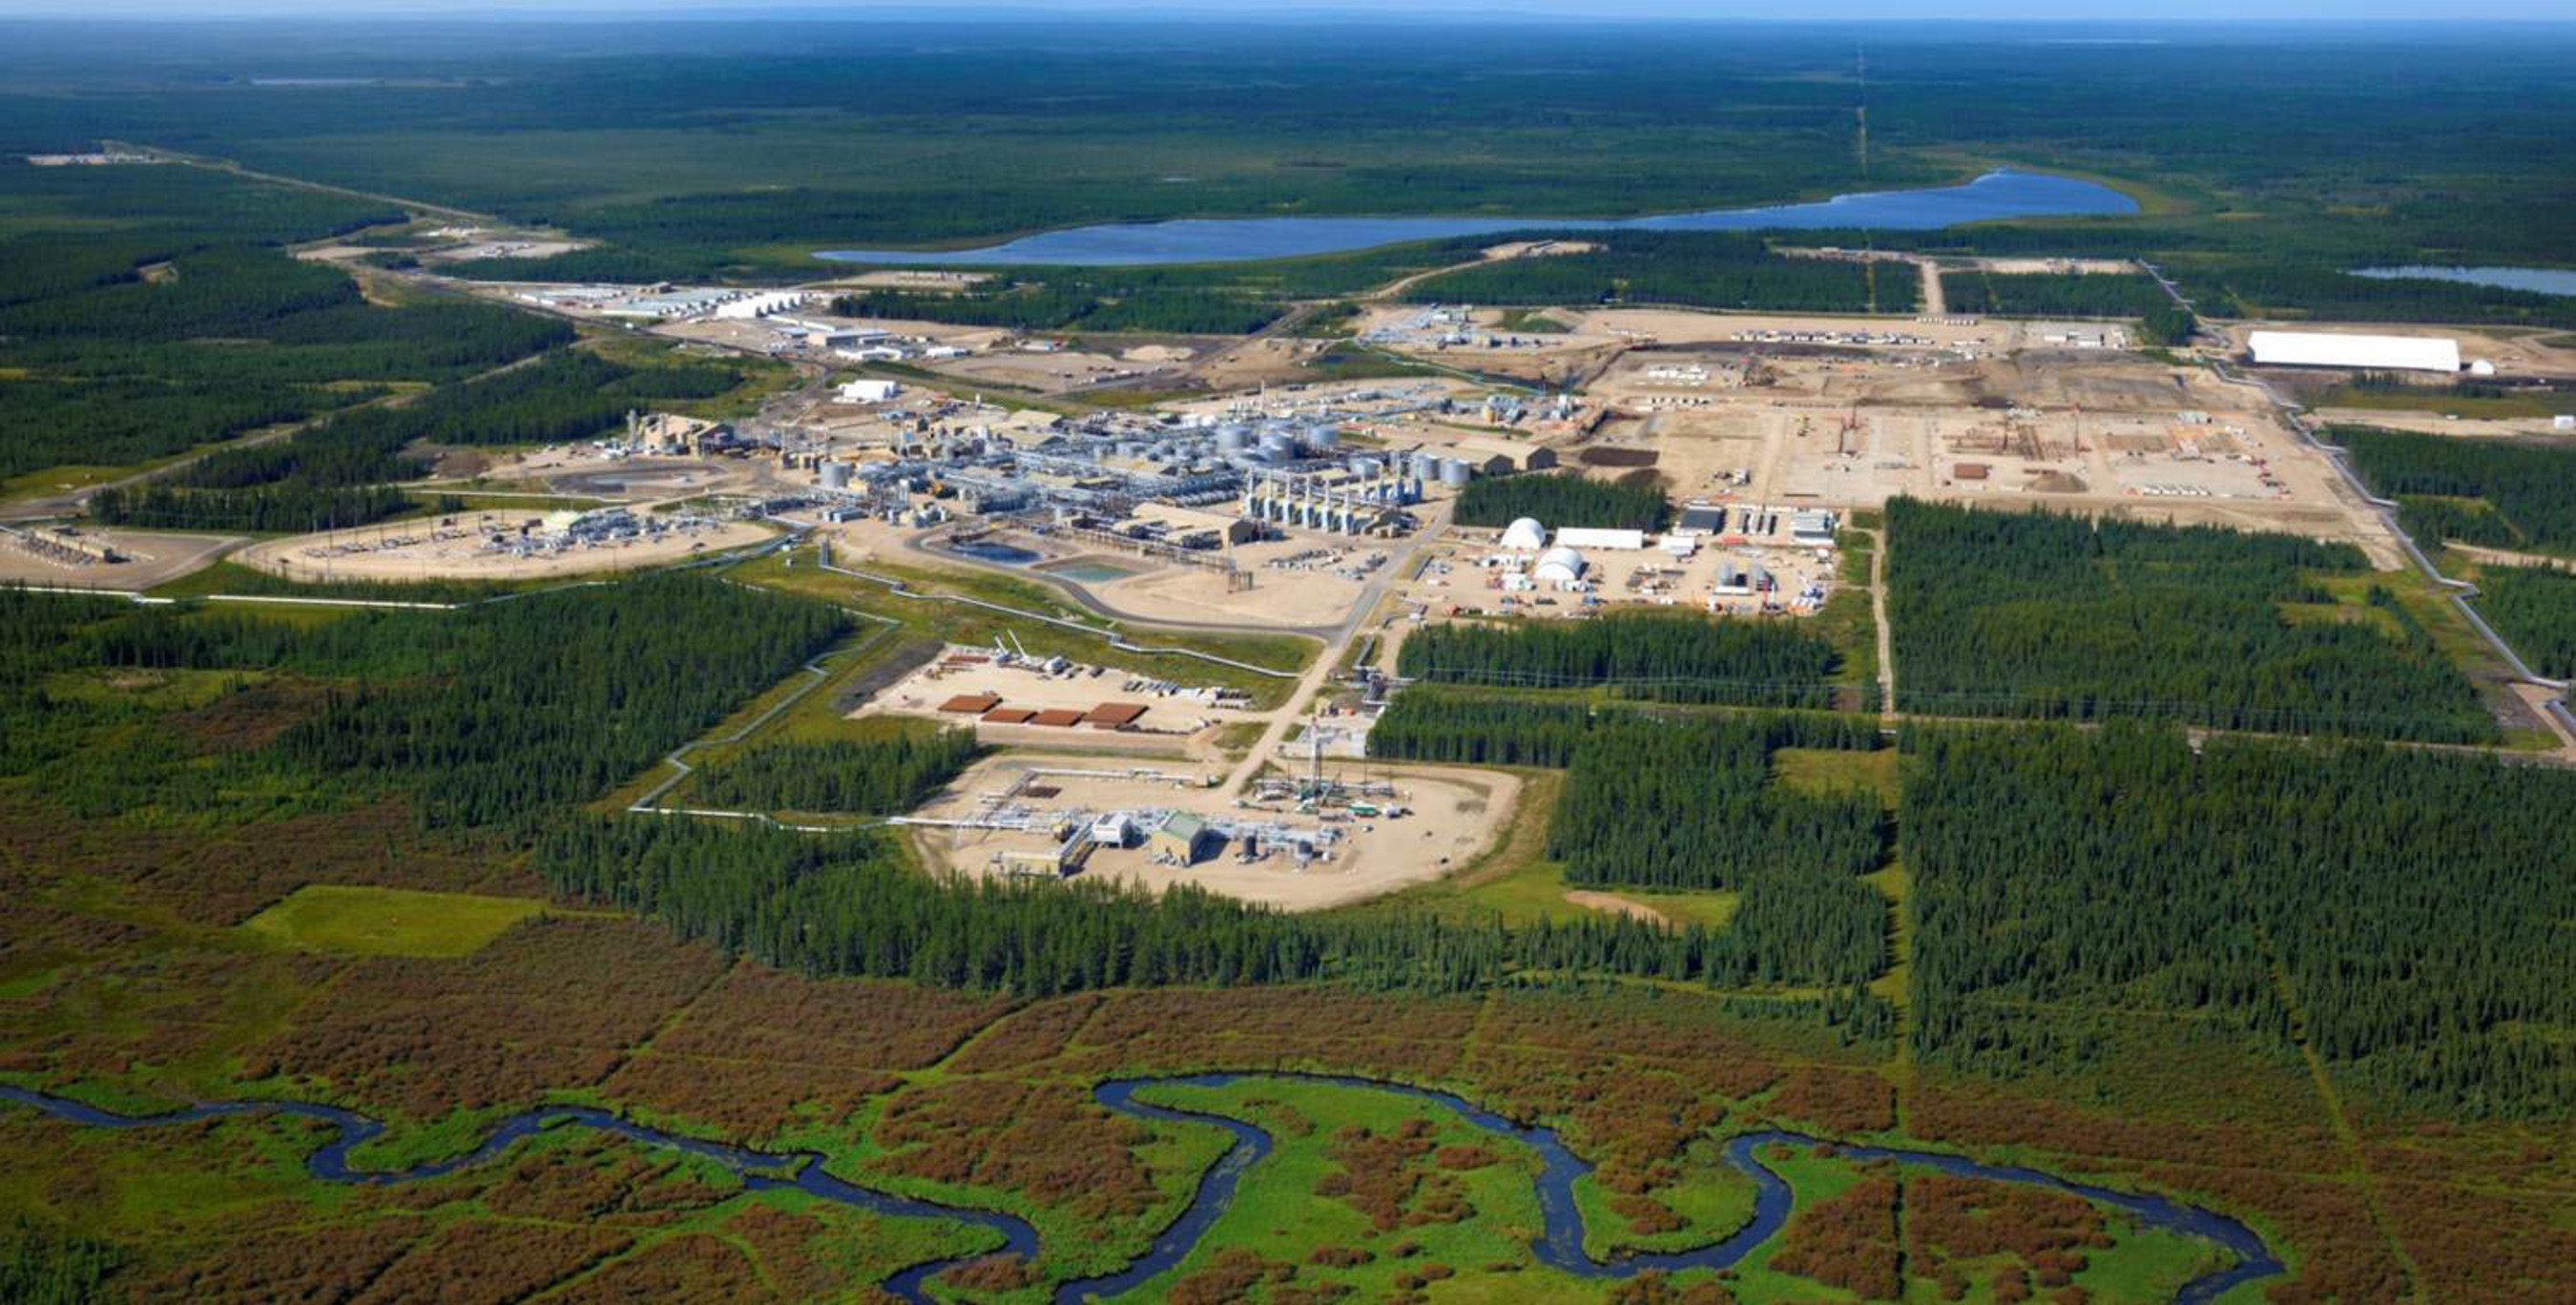 Cenovus's Foster Creek operation in northern Alberta which uses steam-assisted gravity drainage (SAGD) to produce oil (CNW Group/Cenovus Energy Inc.) (PRNewsFoto/Cenovus Energy Inc.)